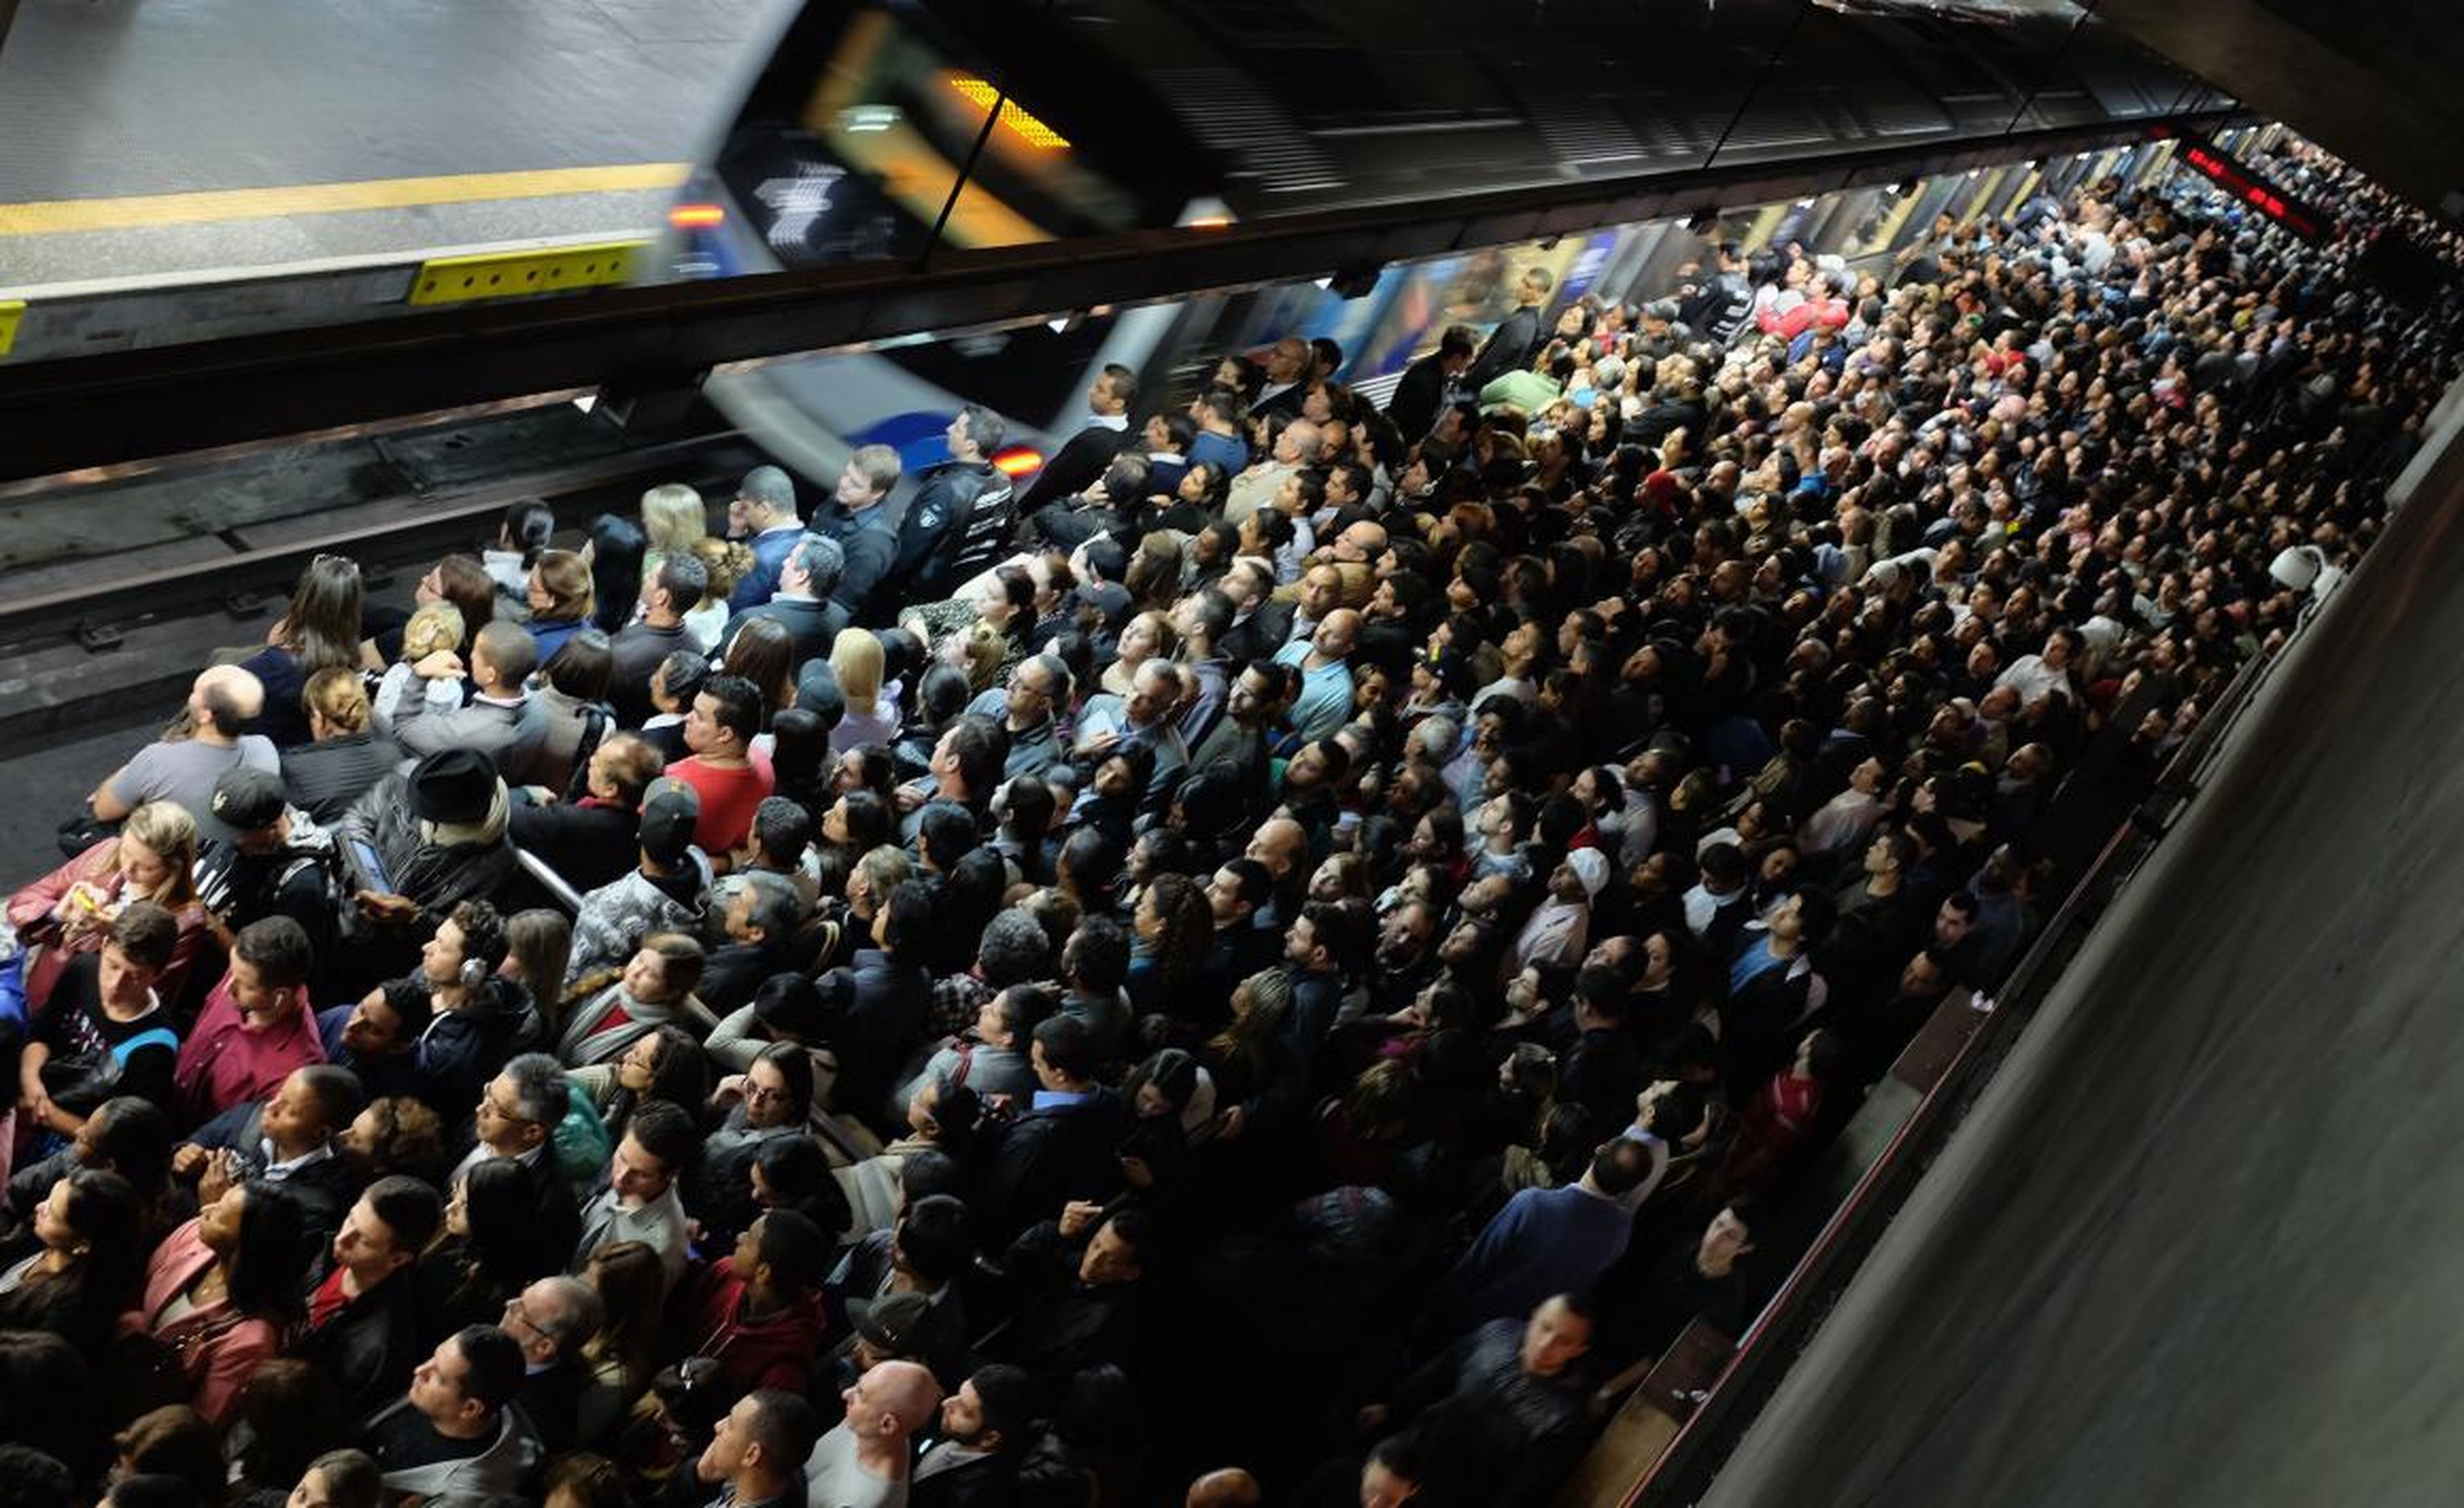 And the subway isn't much better. According to Reuters, Sao Paulo's metropolitan area has close to 20 million people but only 45 miles of underground rail. Just imagine trying to get home in rush hour.